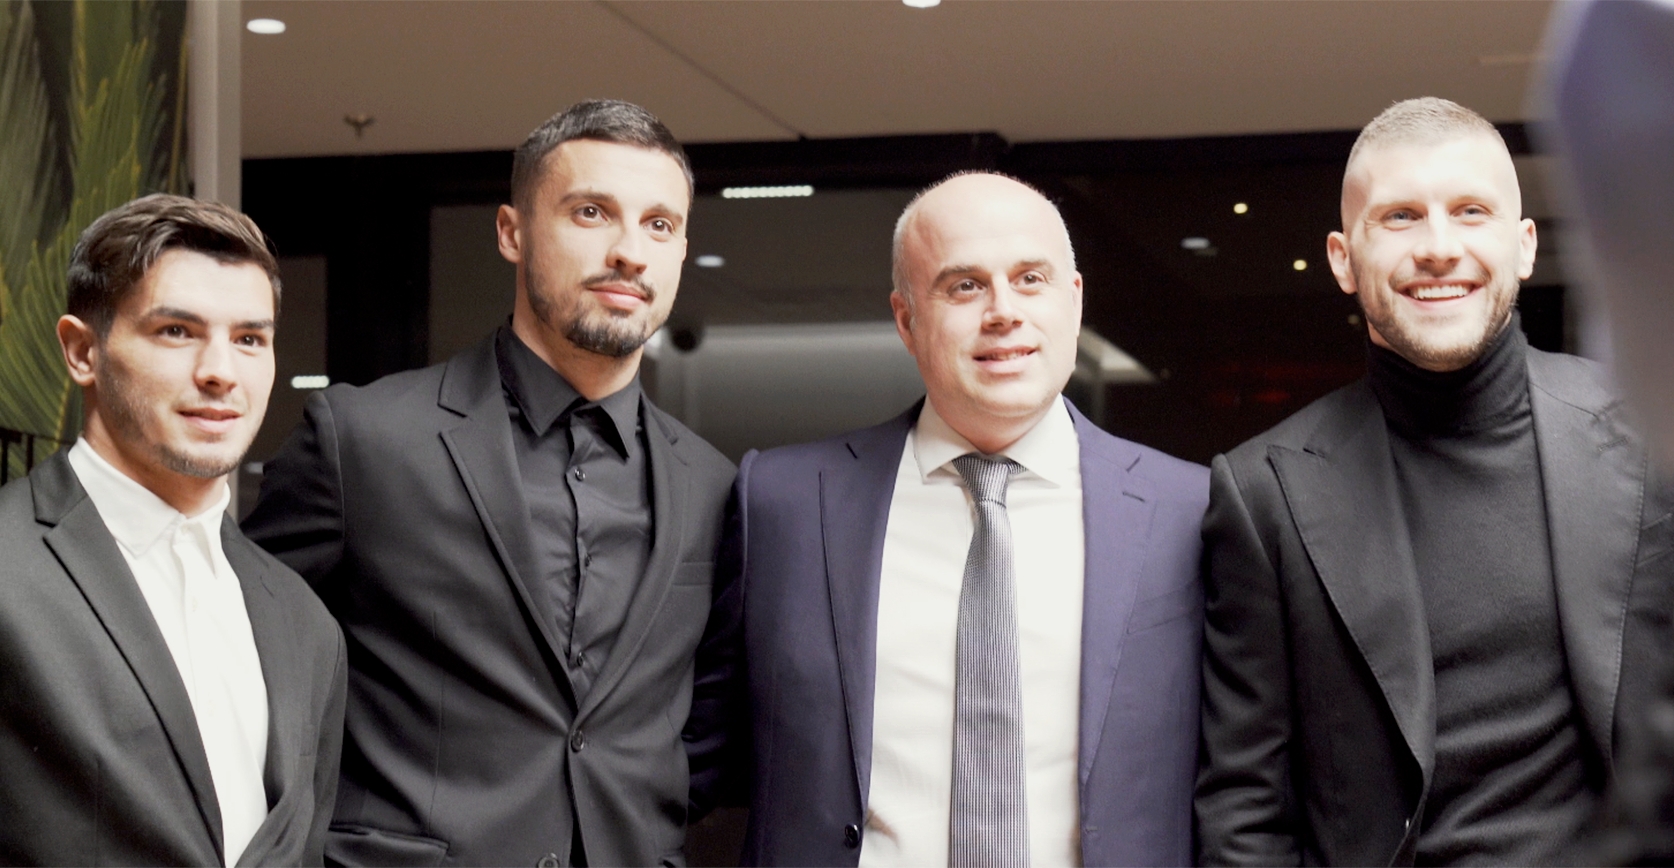 Mario, the experience winner, along with Brahim Diaz, Rade Krunic and Ante Rebic